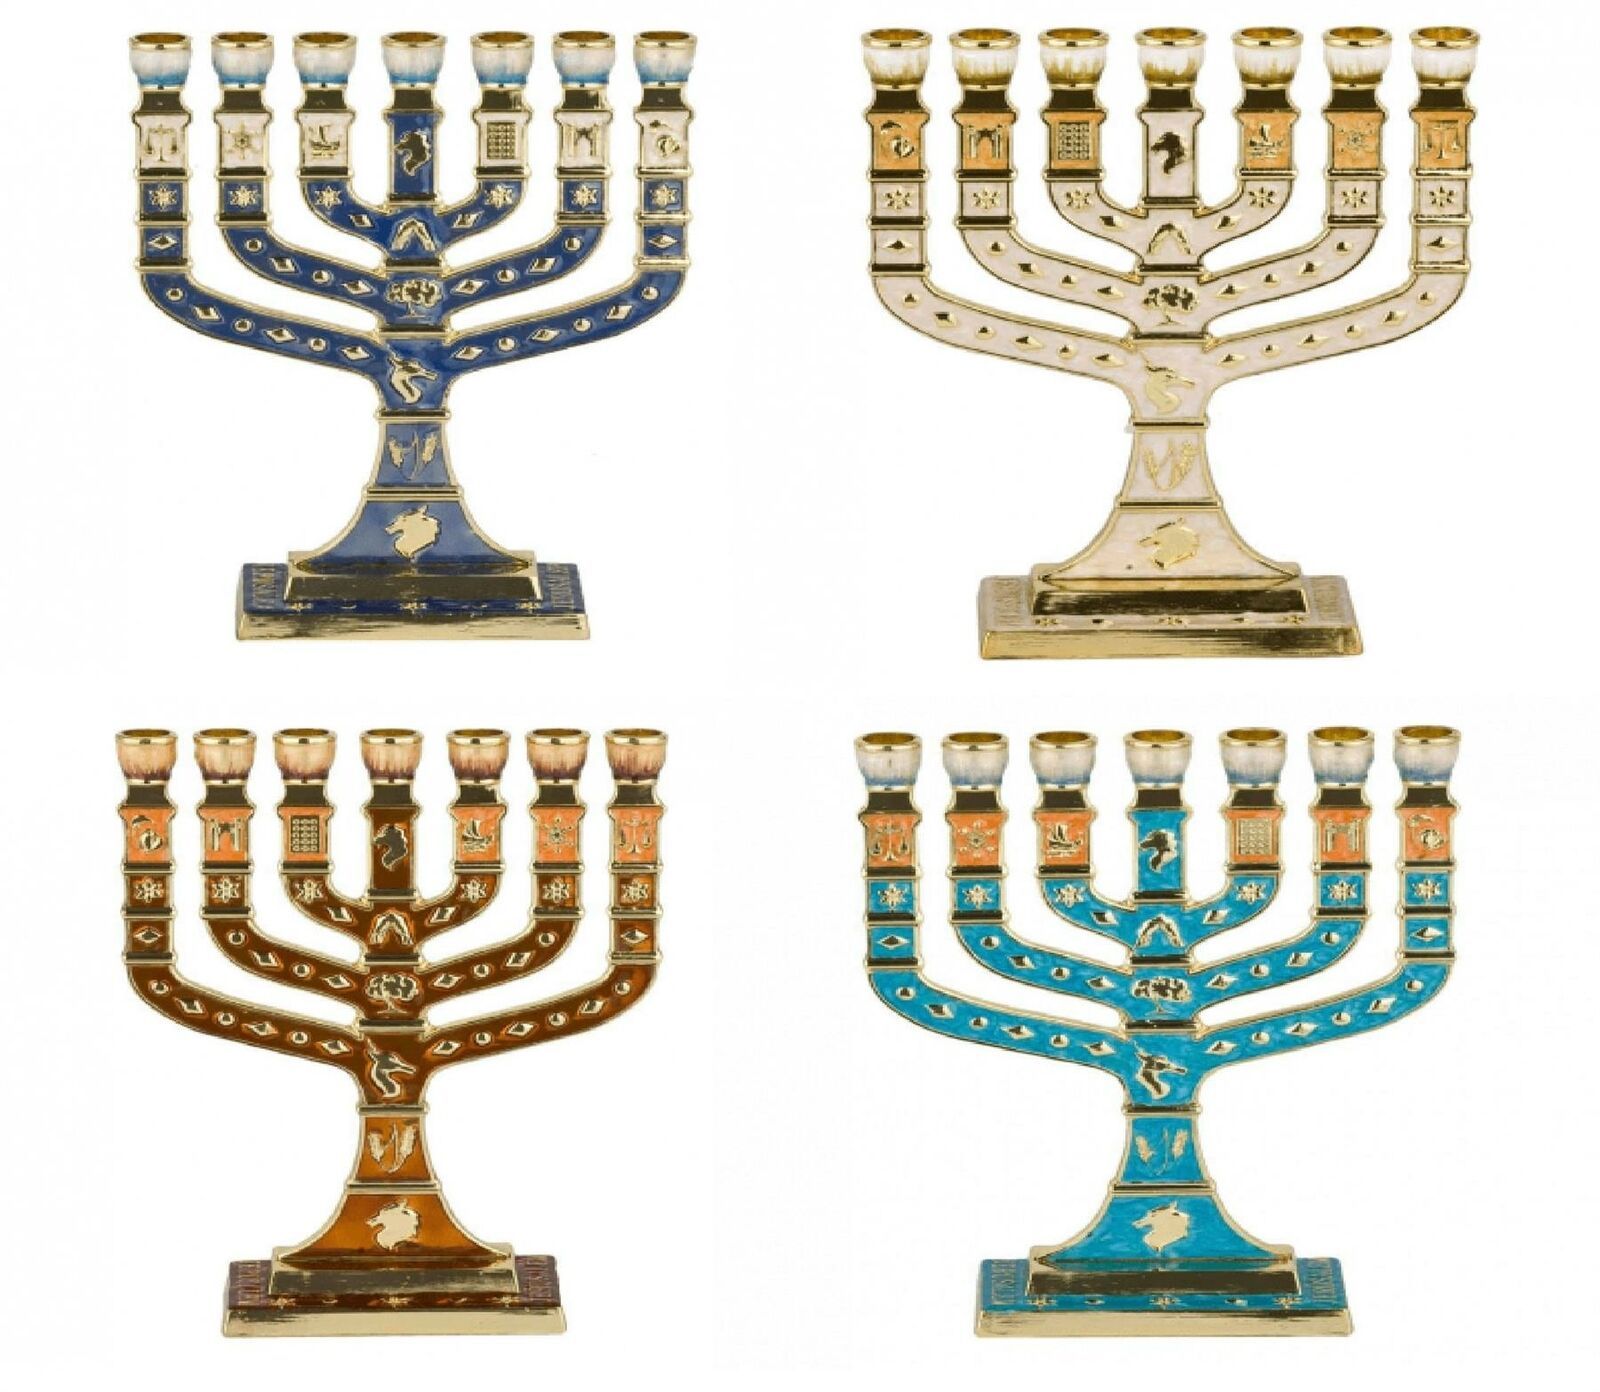 Jerusalem Ornament 7 Branch Menorah 4.7 12 Tribes Temple Gold Plated gift